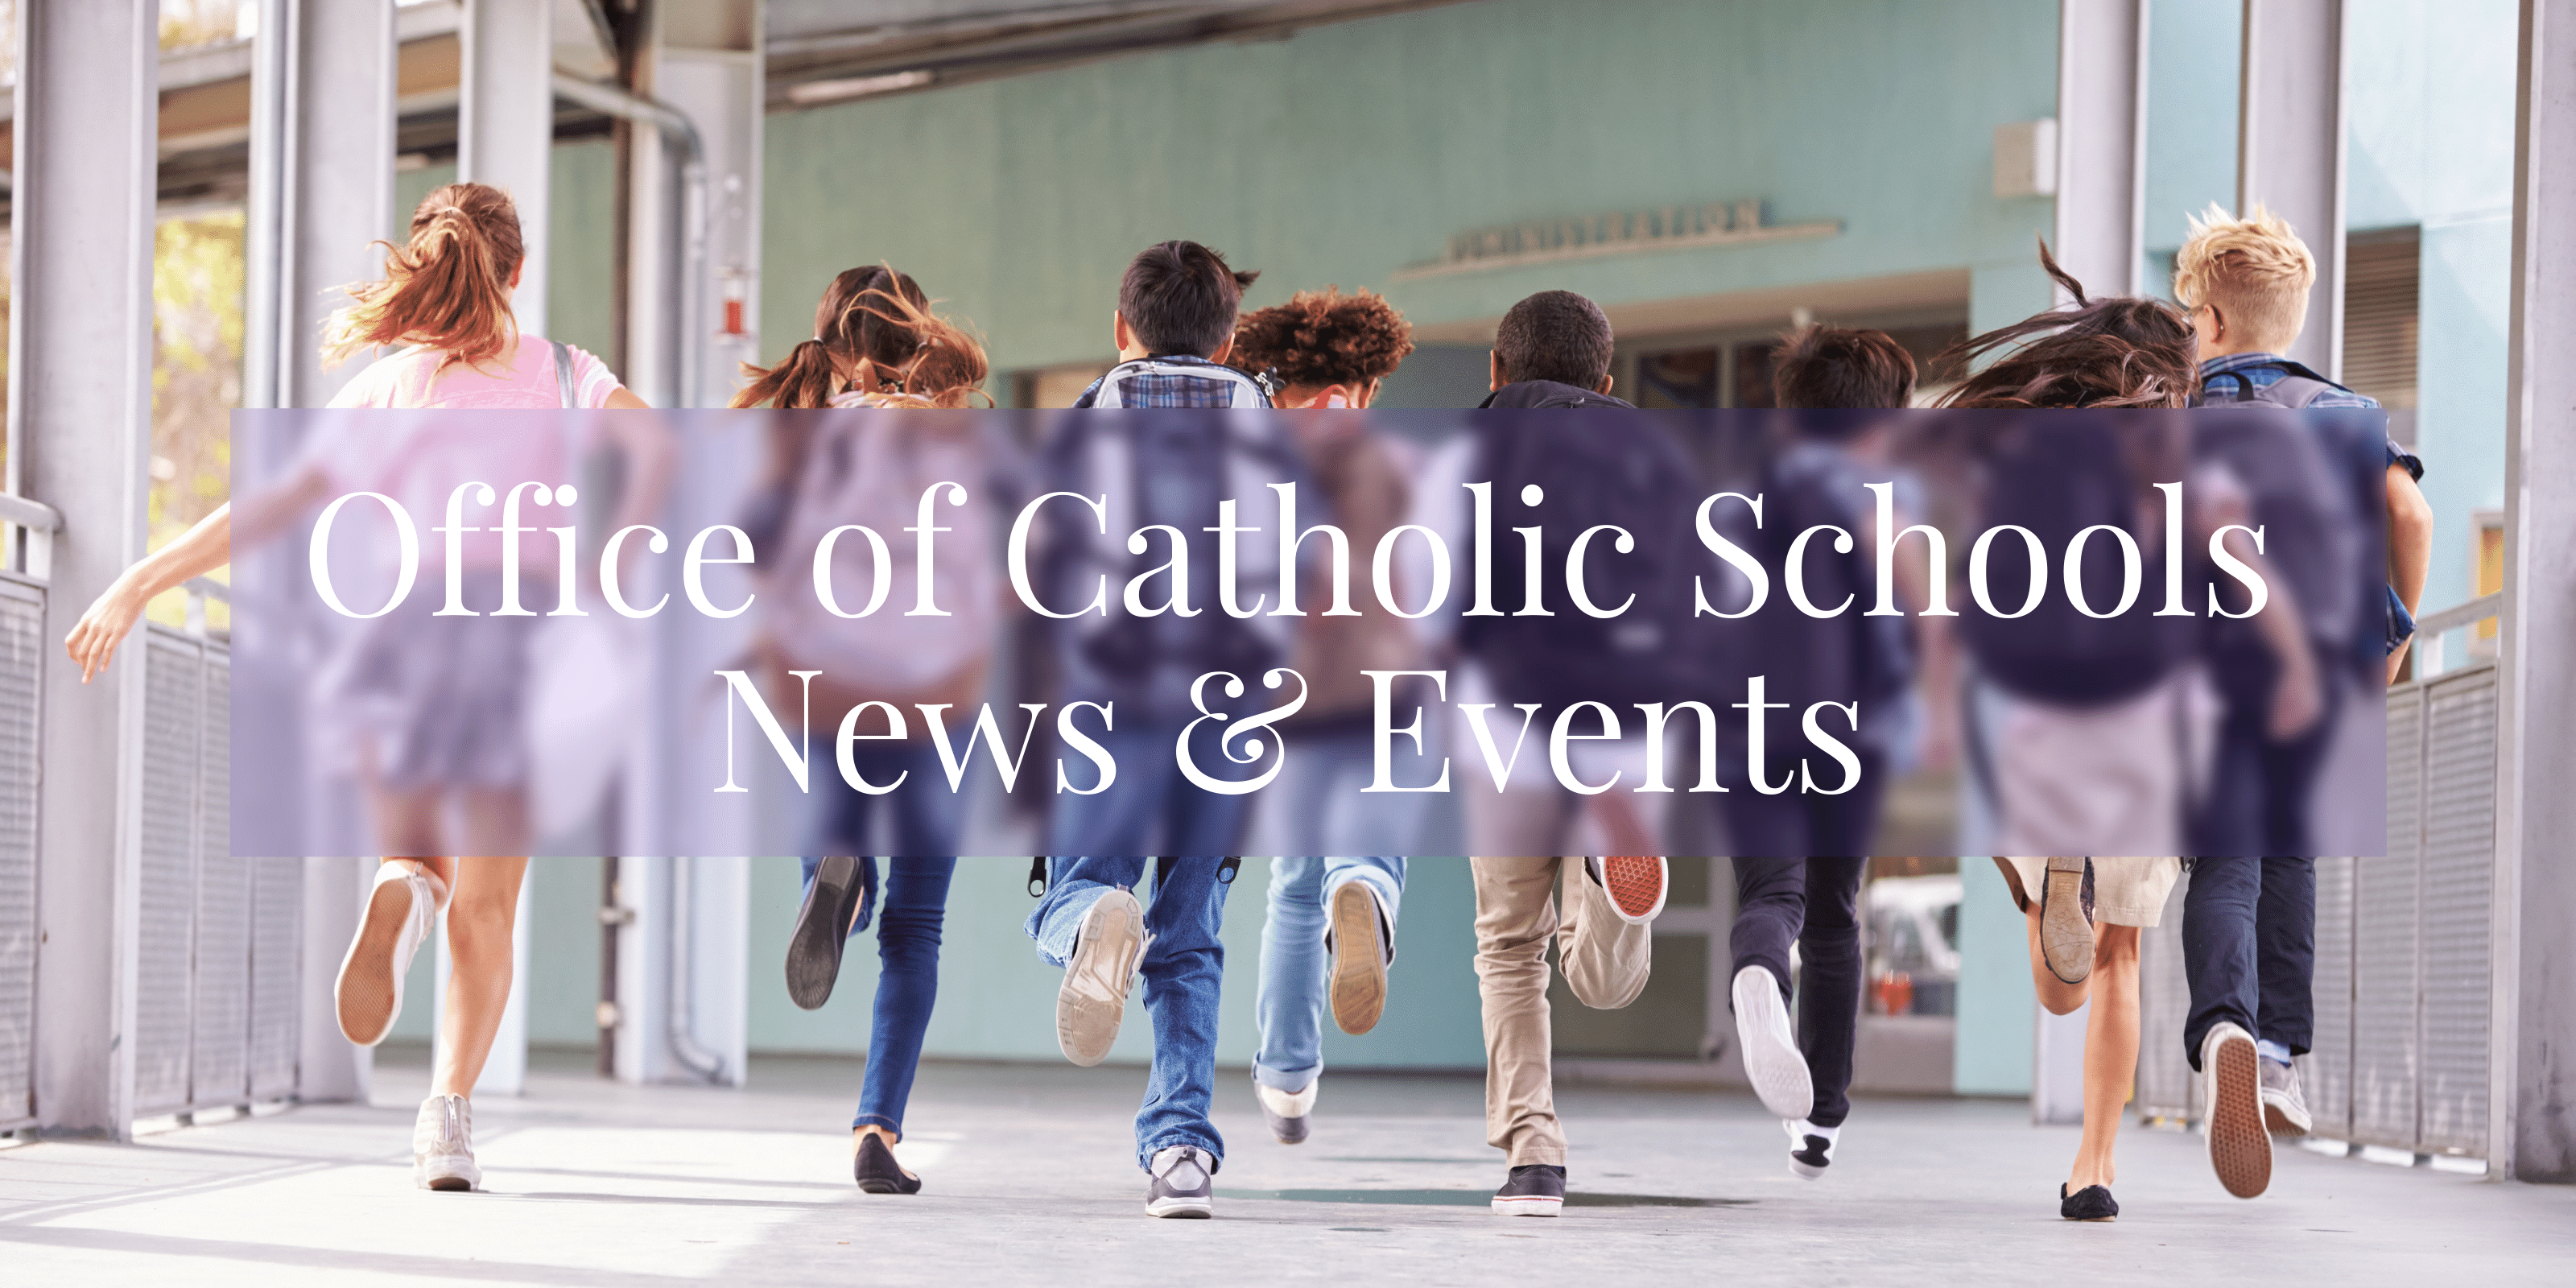 Schools News and Events